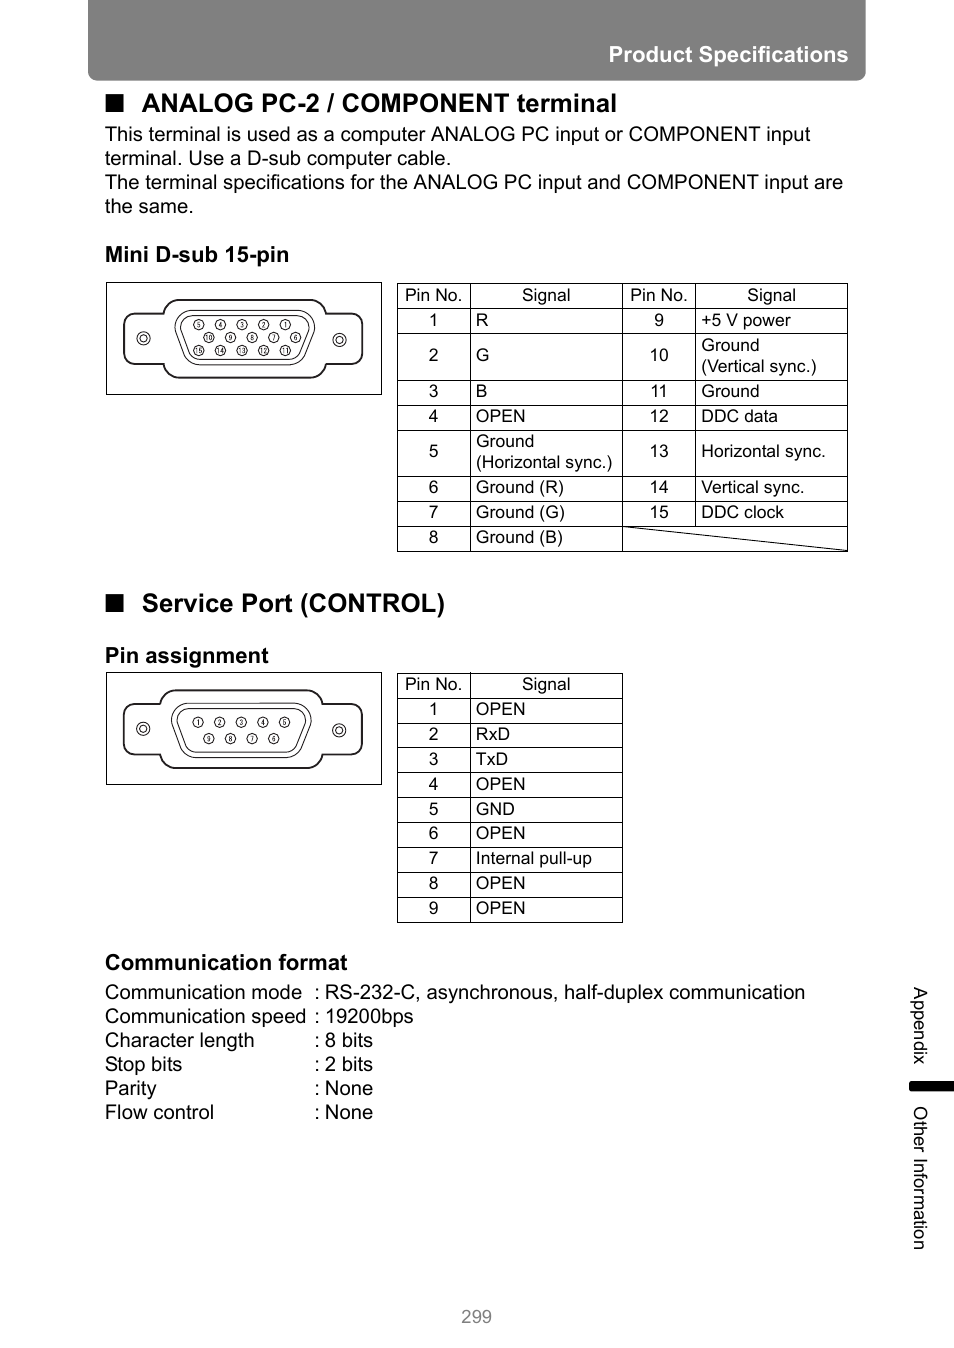 Analog pc-2 / component terminal, Service port (control), Product specifications | Mini d-sub 15-pin, Pin assignment communication format | Canon XEED WUX450 User Manual | Page 299 / 314